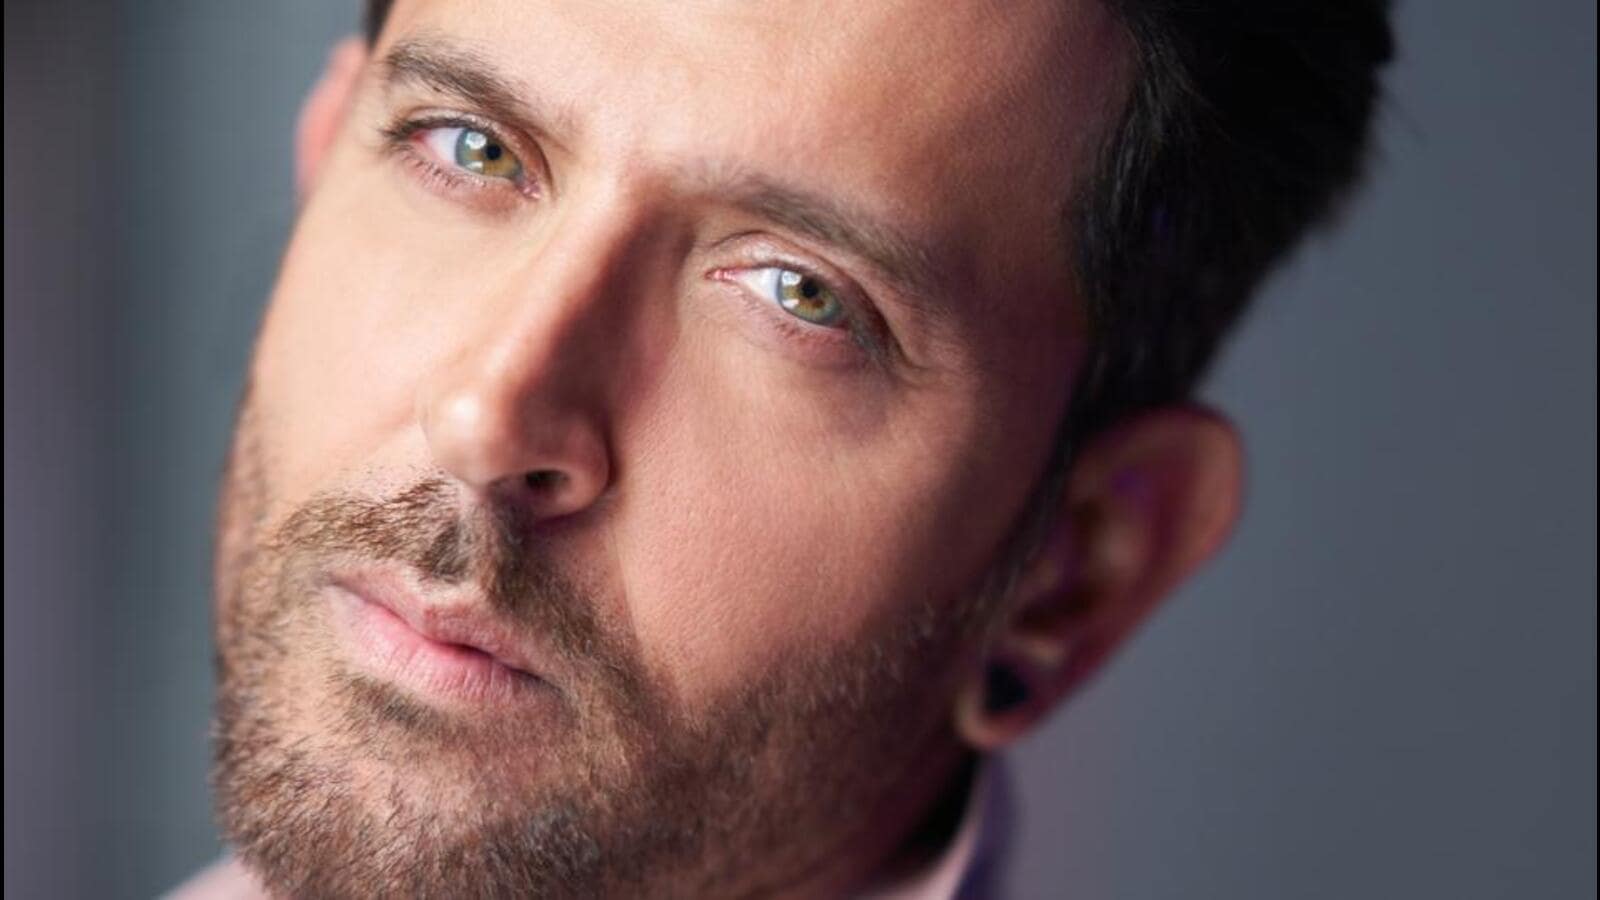 EXCLUSIVE, Hrithik Roshan: Birthdays used to be fun, then became a chore,  now an opportunity